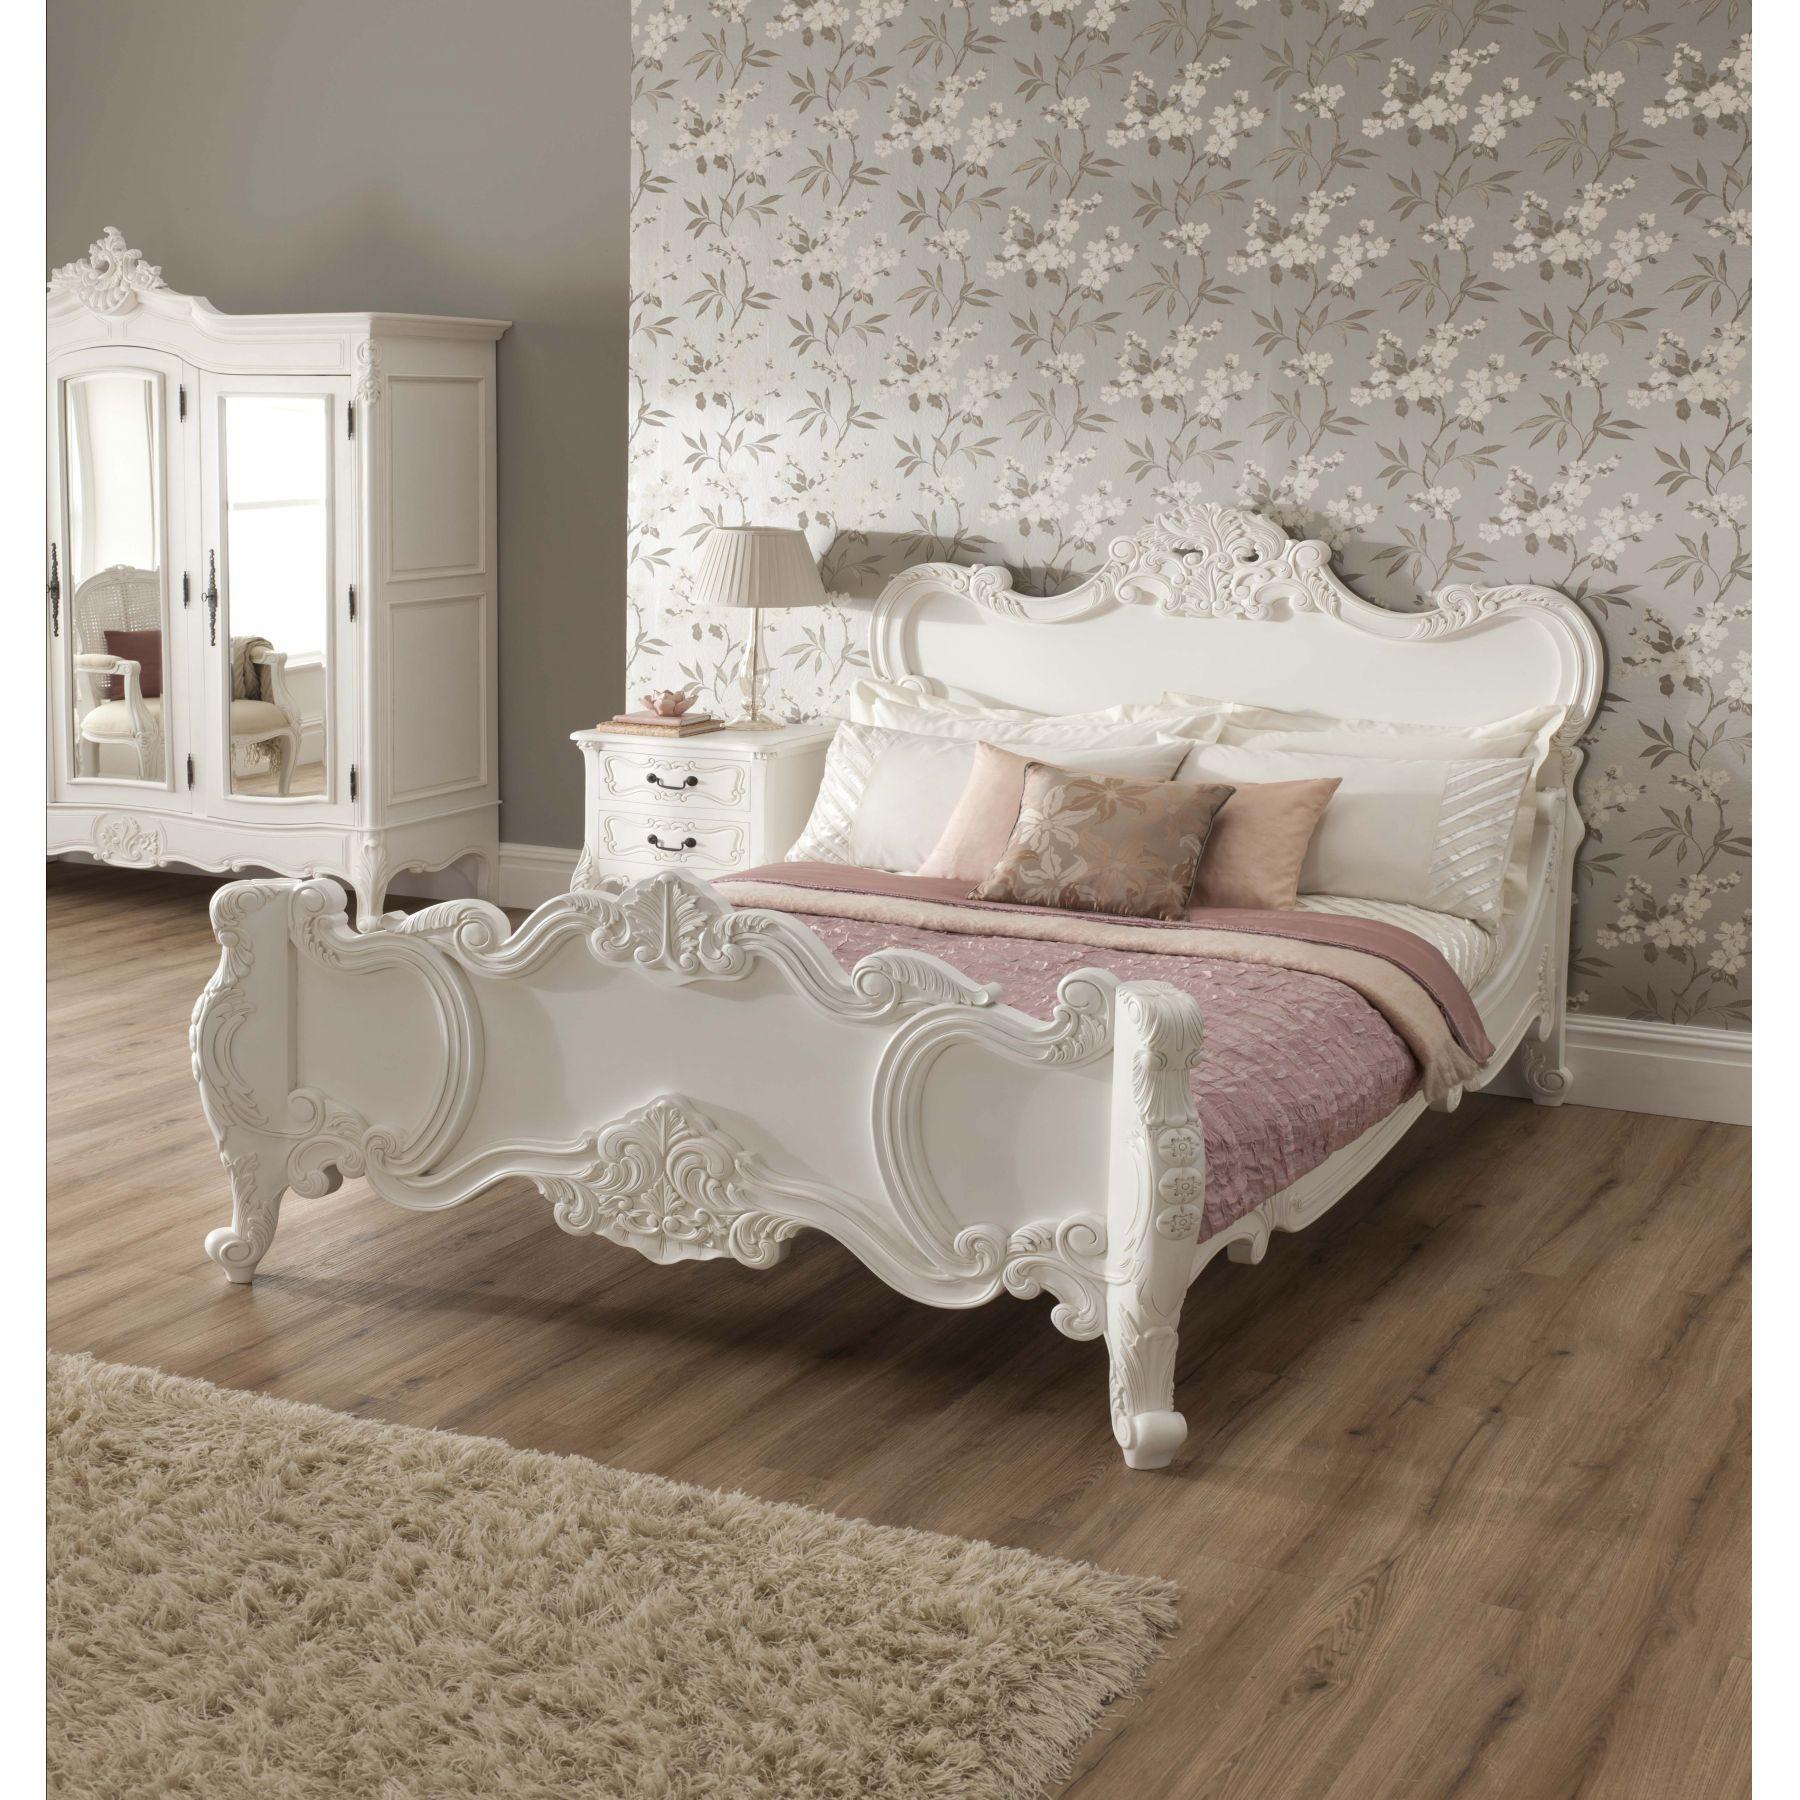 Shabby Chic Bedroom Set
 Vintage Your Room with 9 Shabby Chic Bedroom Furniture